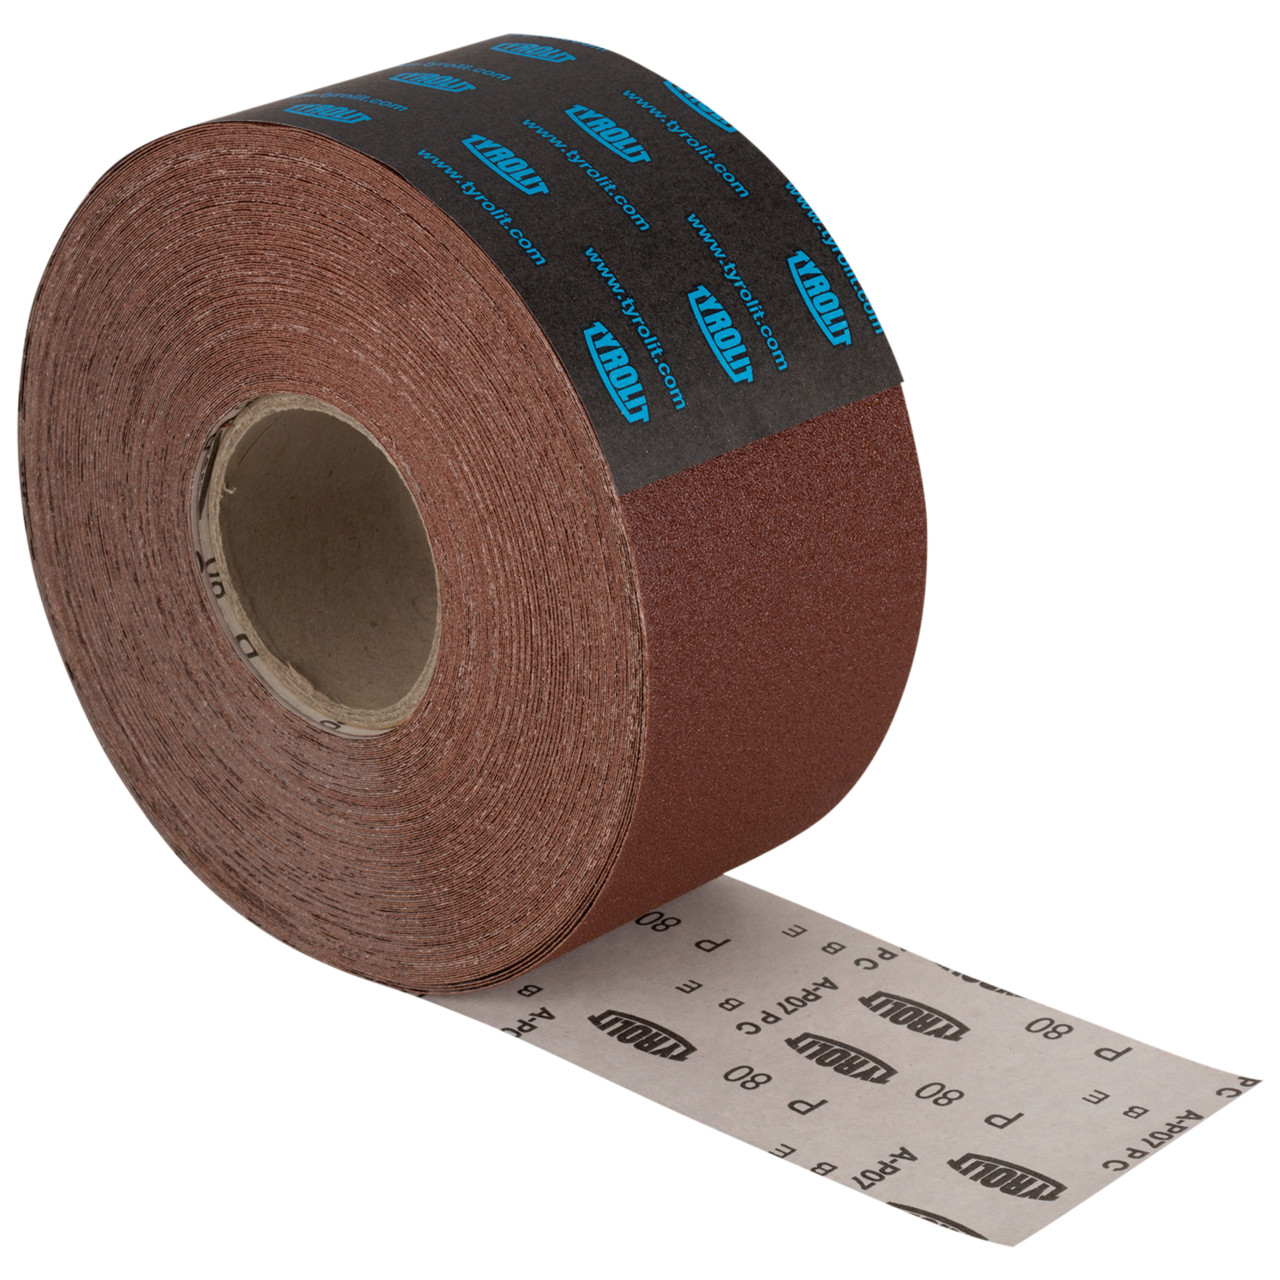 Tyrolit A-P07 P C Paper rolls TxH 115x50 For steel, non-ferrous metals, wood, paints and varnishes, P60, mould: ROLL, Art. 705965